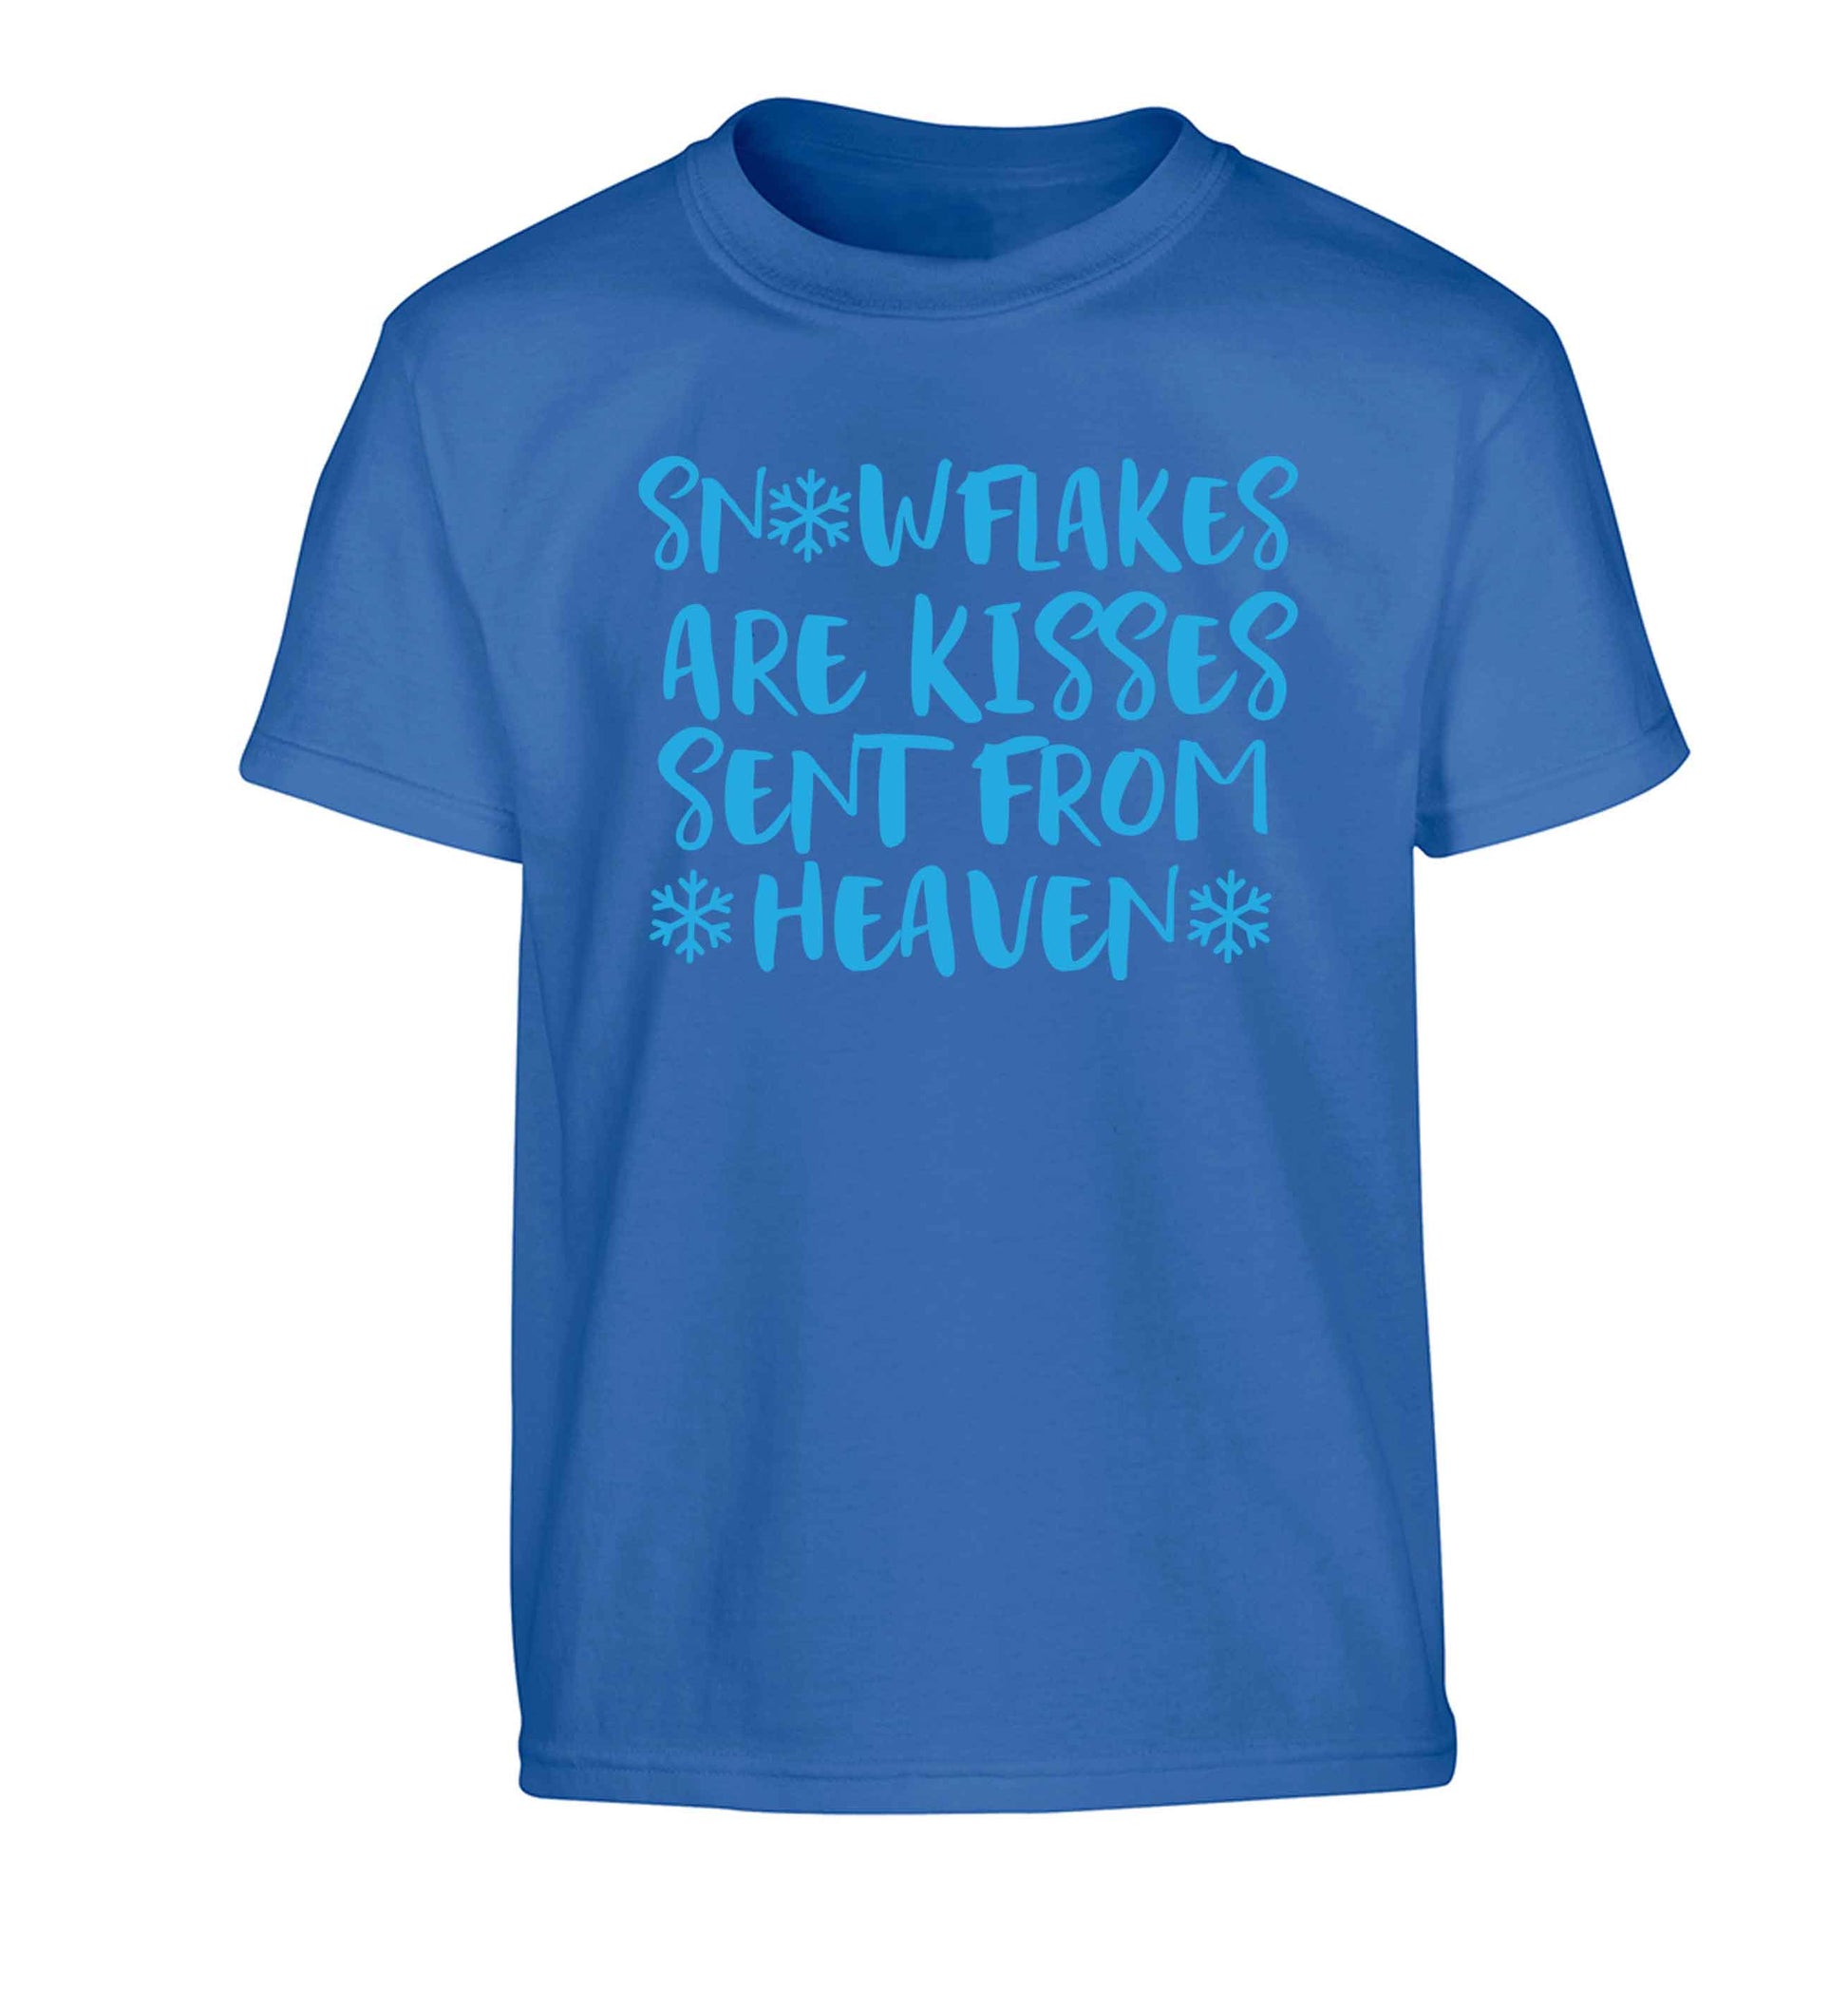 Snowflakes are kisses sent from heaven Children's blue Tshirt 12-13 Years